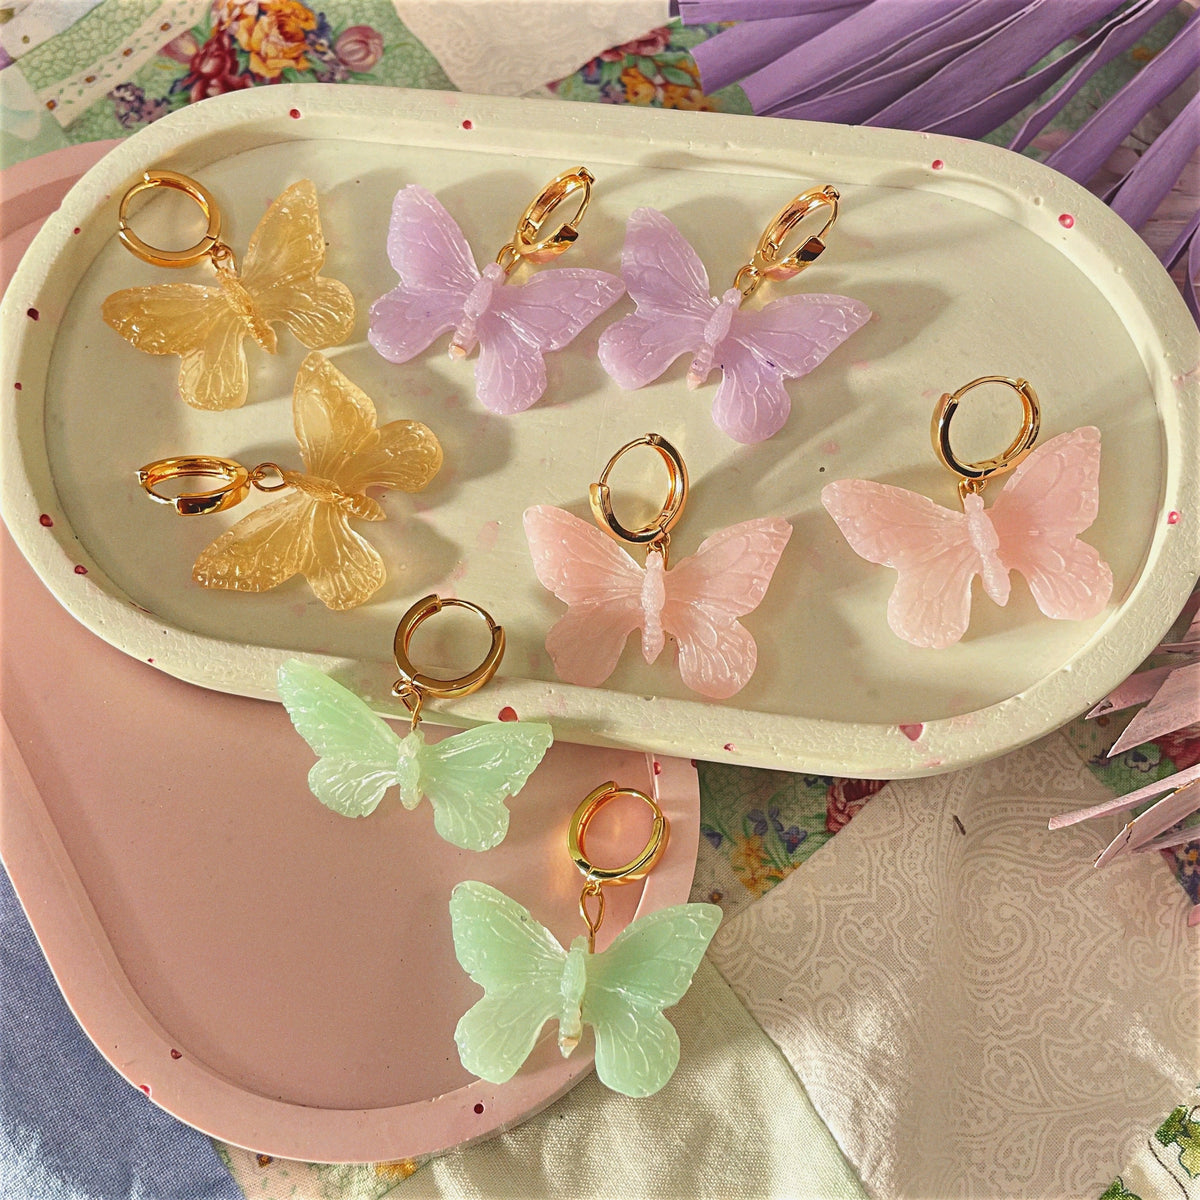 Handmade butterfly-shaped statement earrings crafted with polymer clay, featuring vibrant colors of pink, purple, gold, and green, displayed on trays.